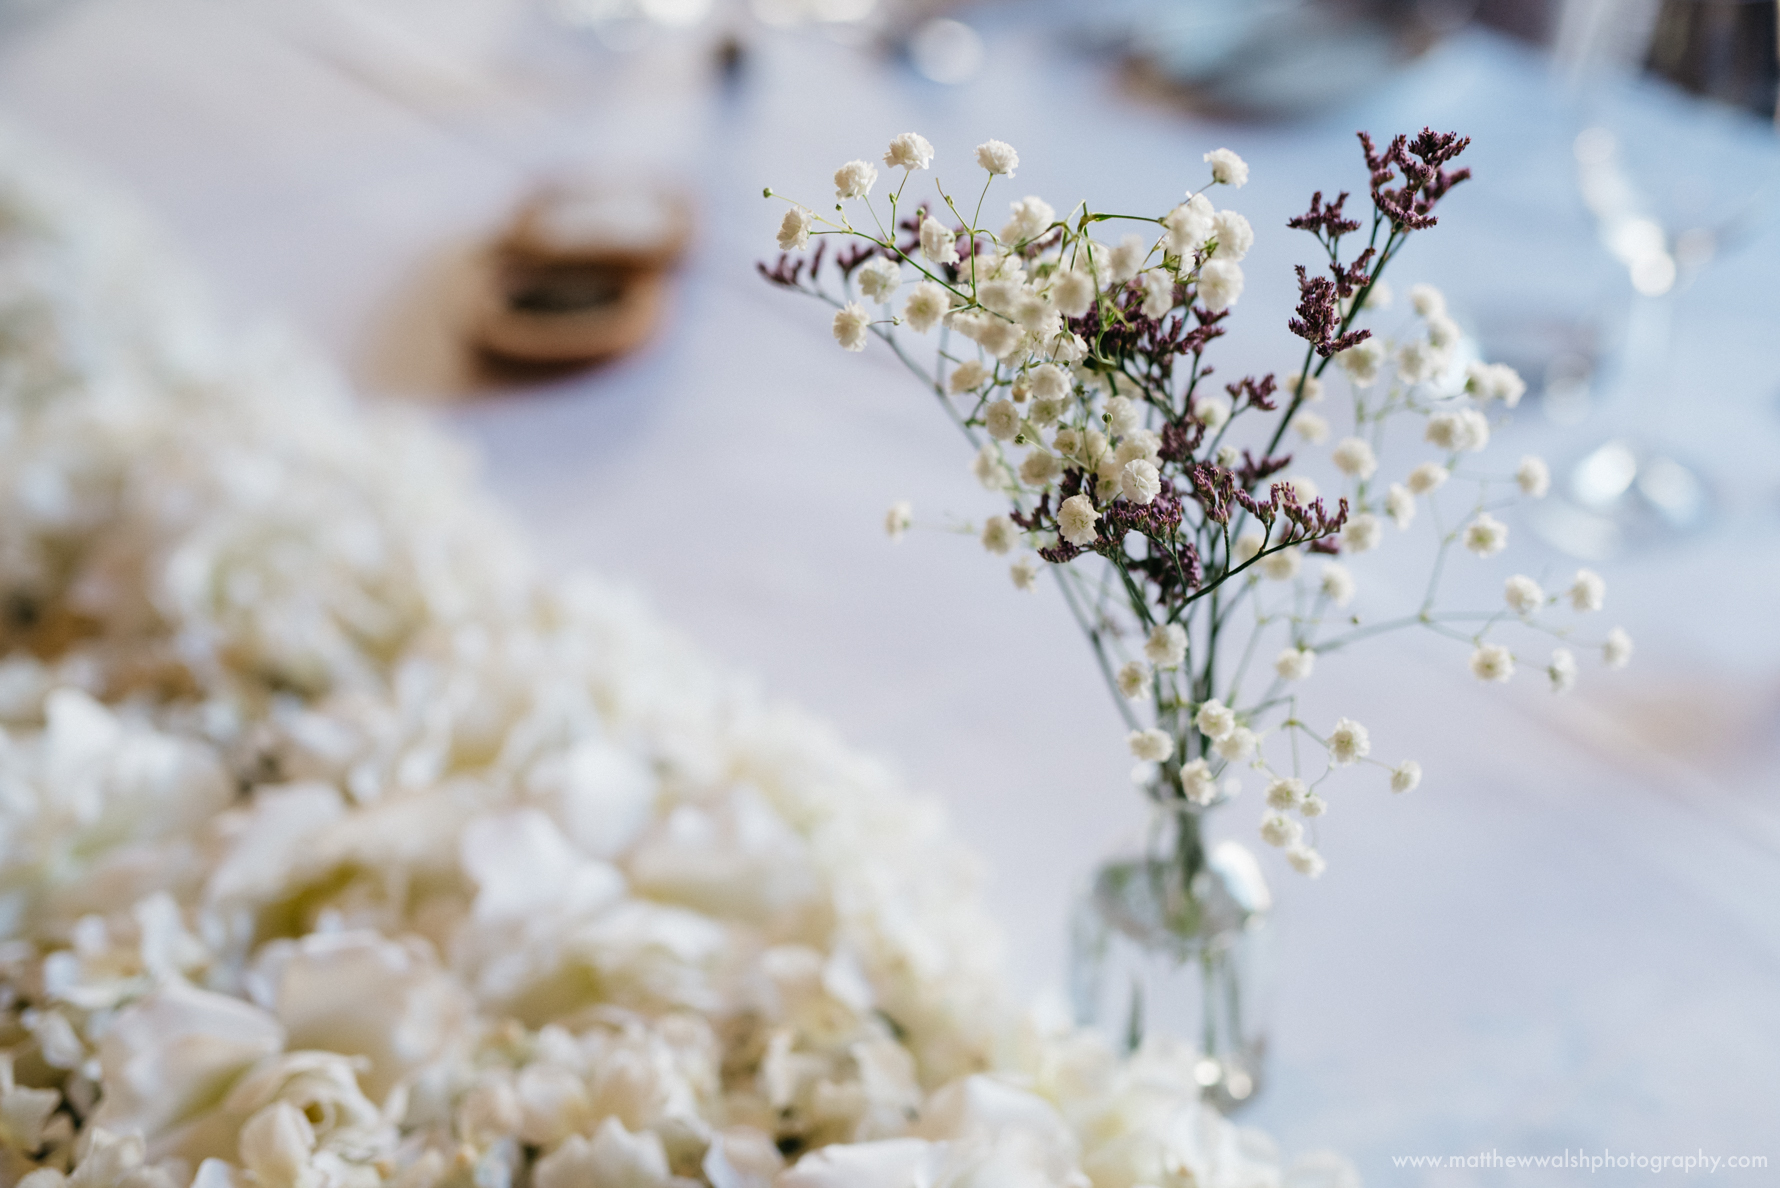 Simple but stylish table flowers